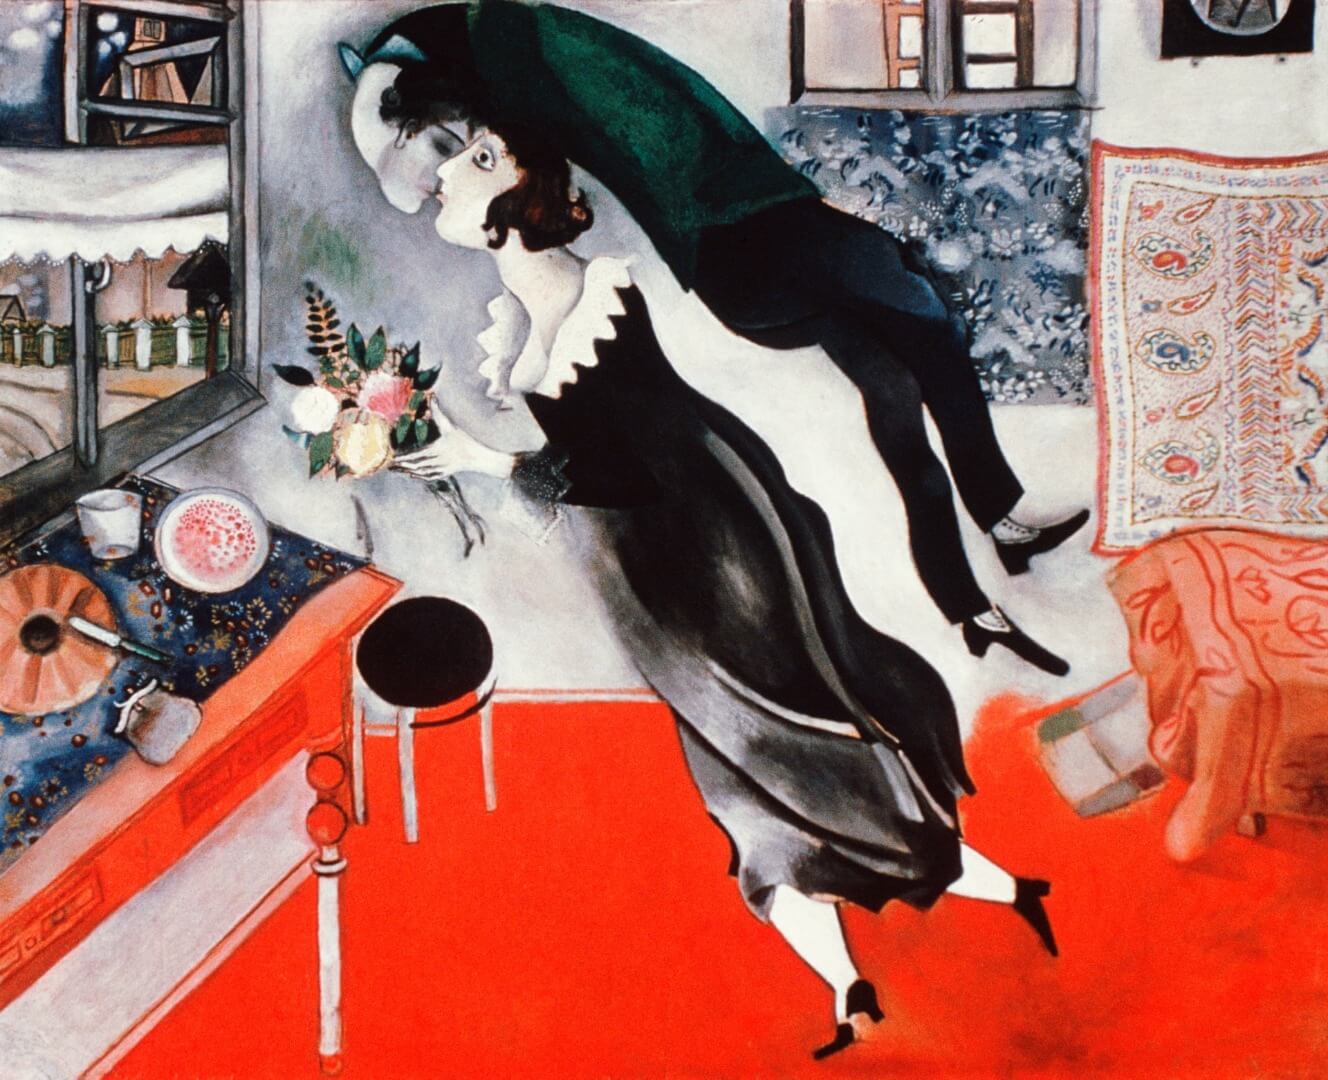 The Birthday, by Marc Chagall